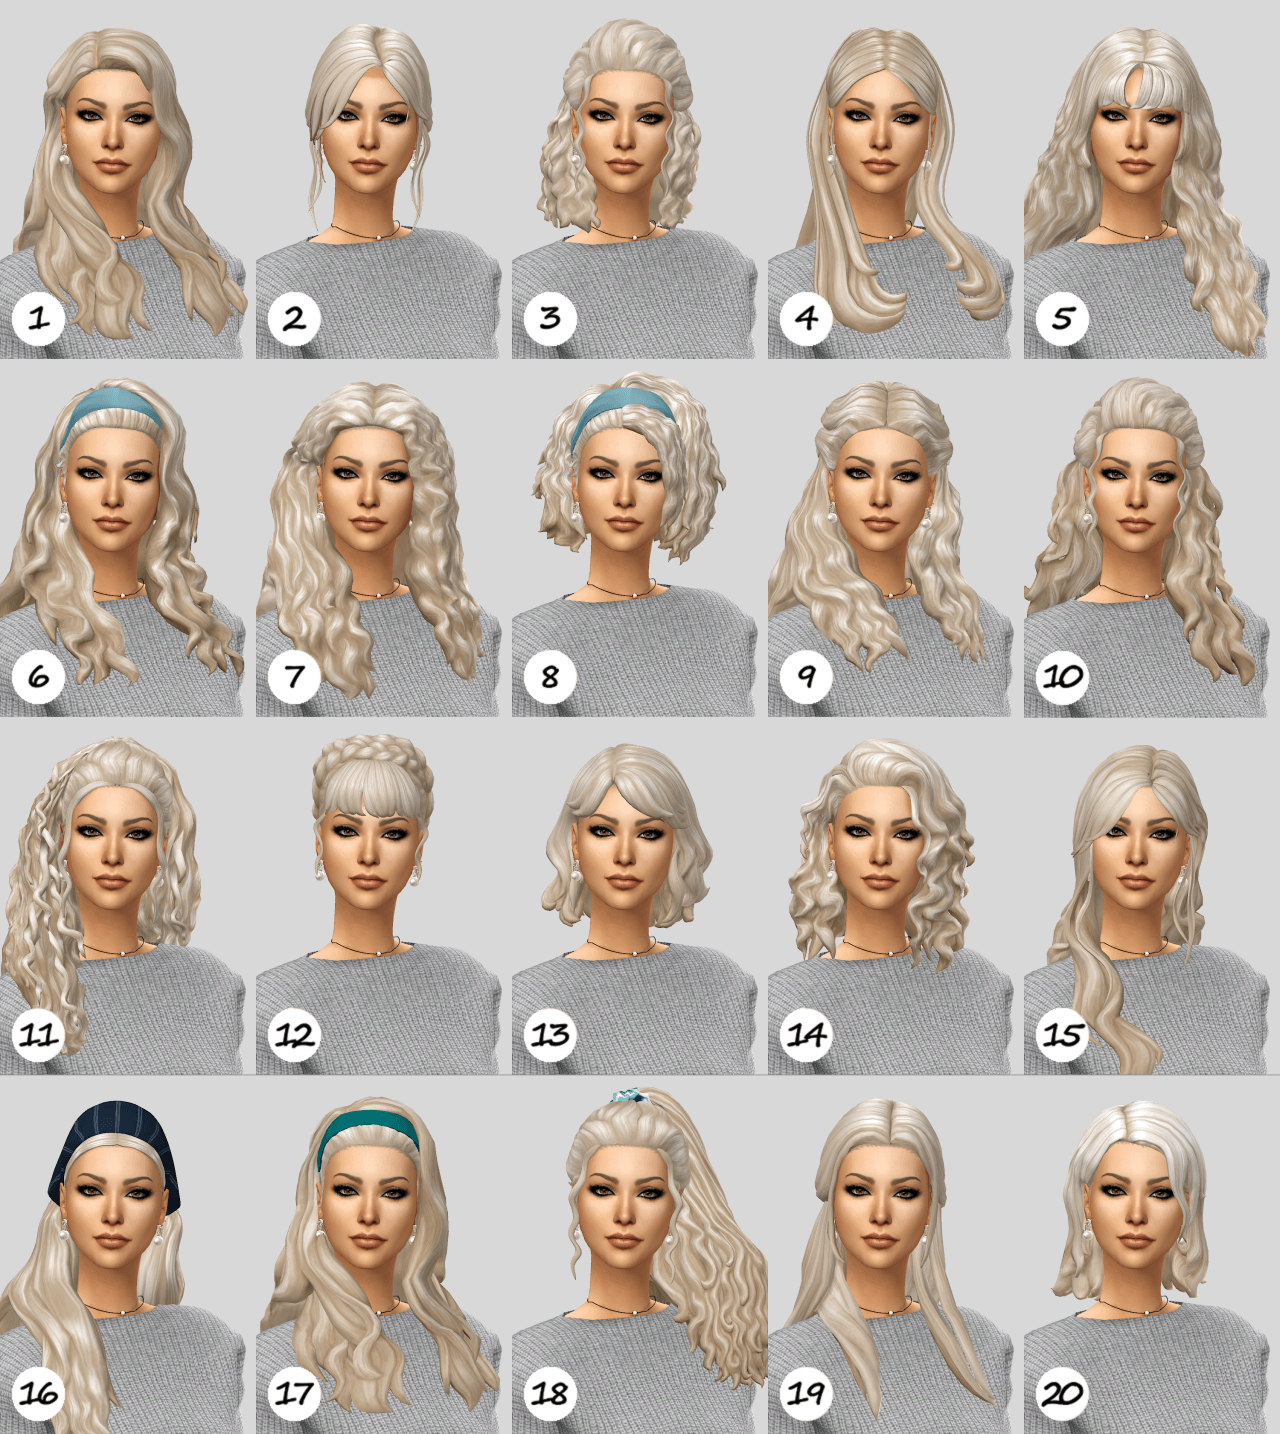 Sims 4 Hair Recolors Up To Cats And Dogs Bxebubble